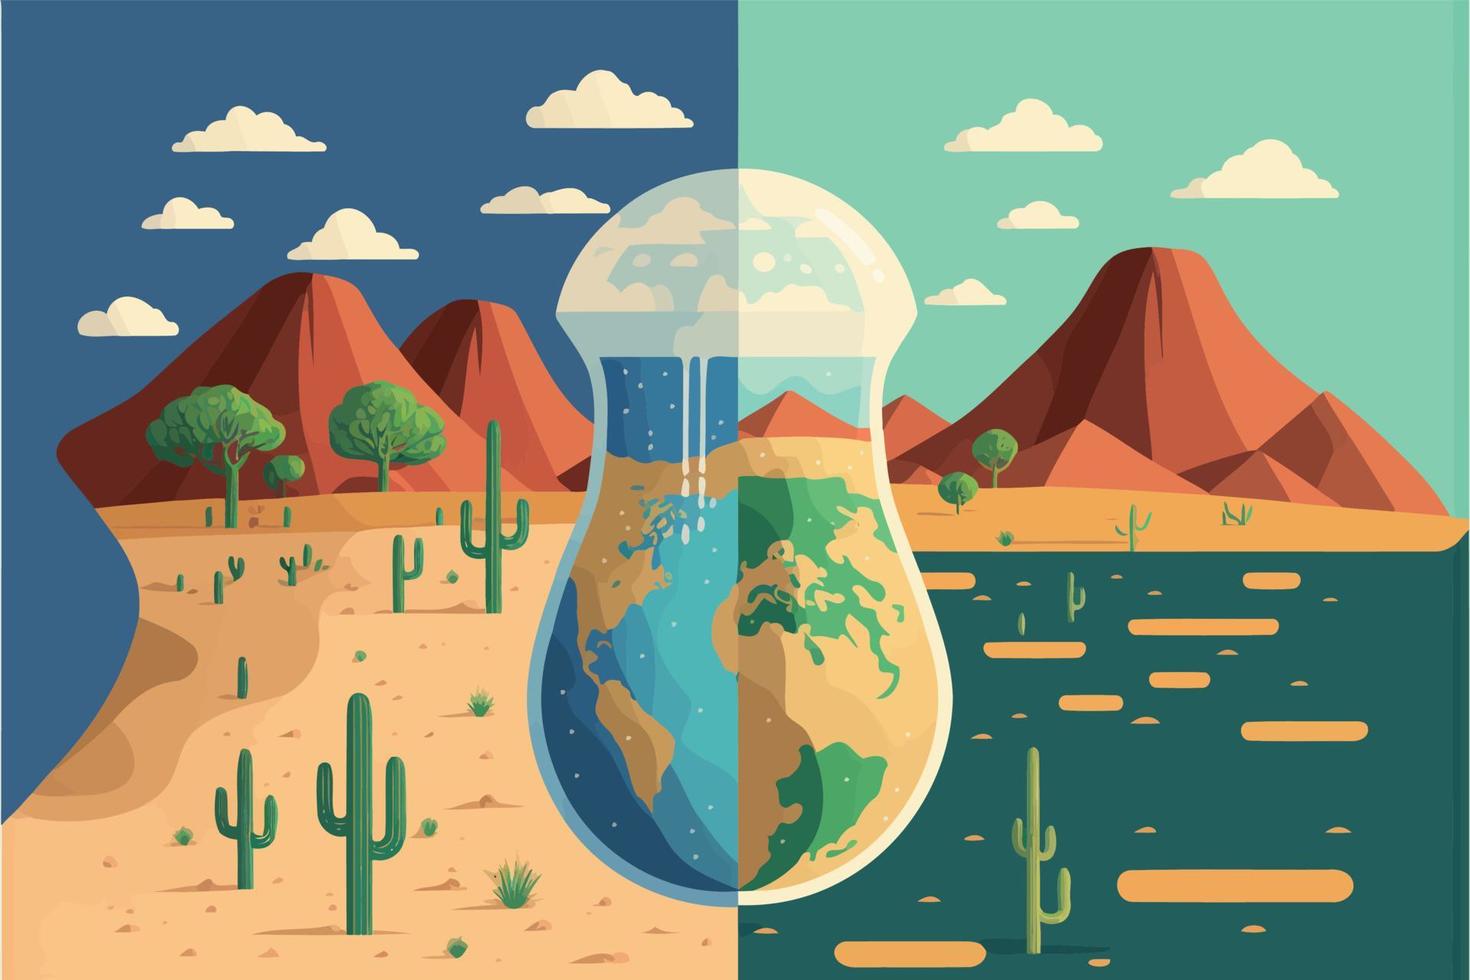 a desert exhibiting scarcity of water resources vector